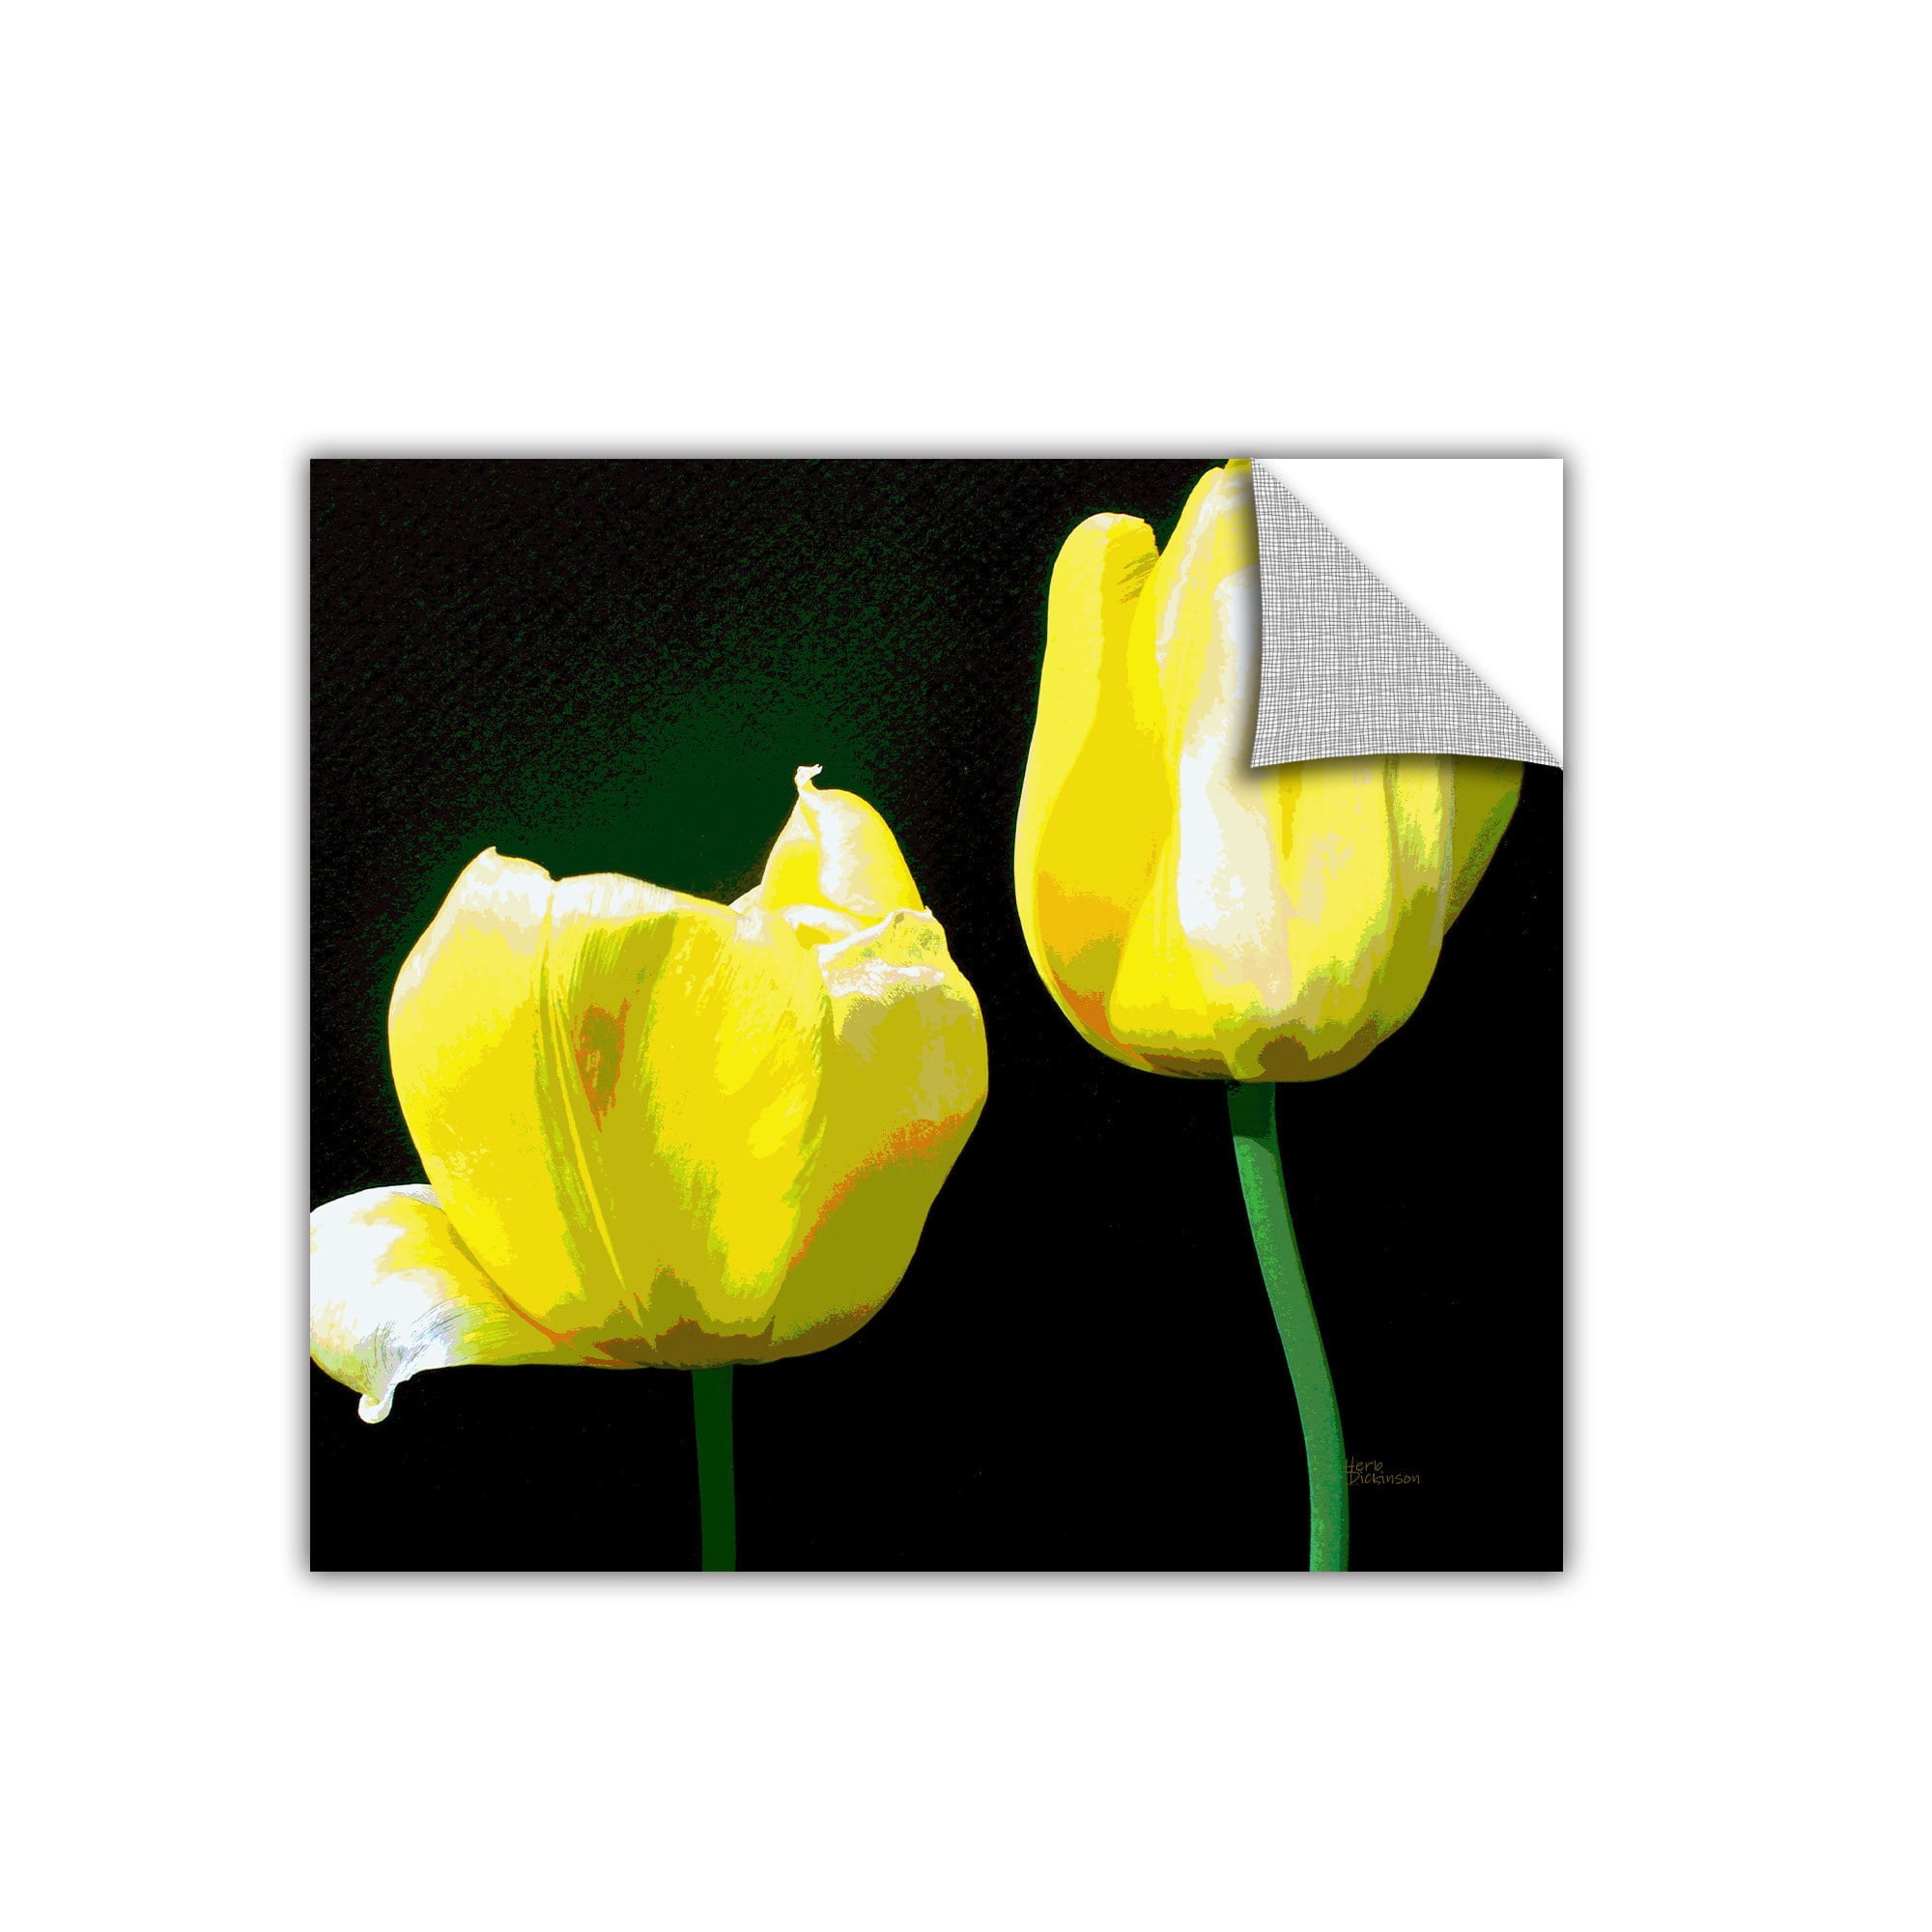 ArtWall Herb Dickinson Yellow Tulips 2 Removable Graphic Wall Art 24 by 24-Inch 